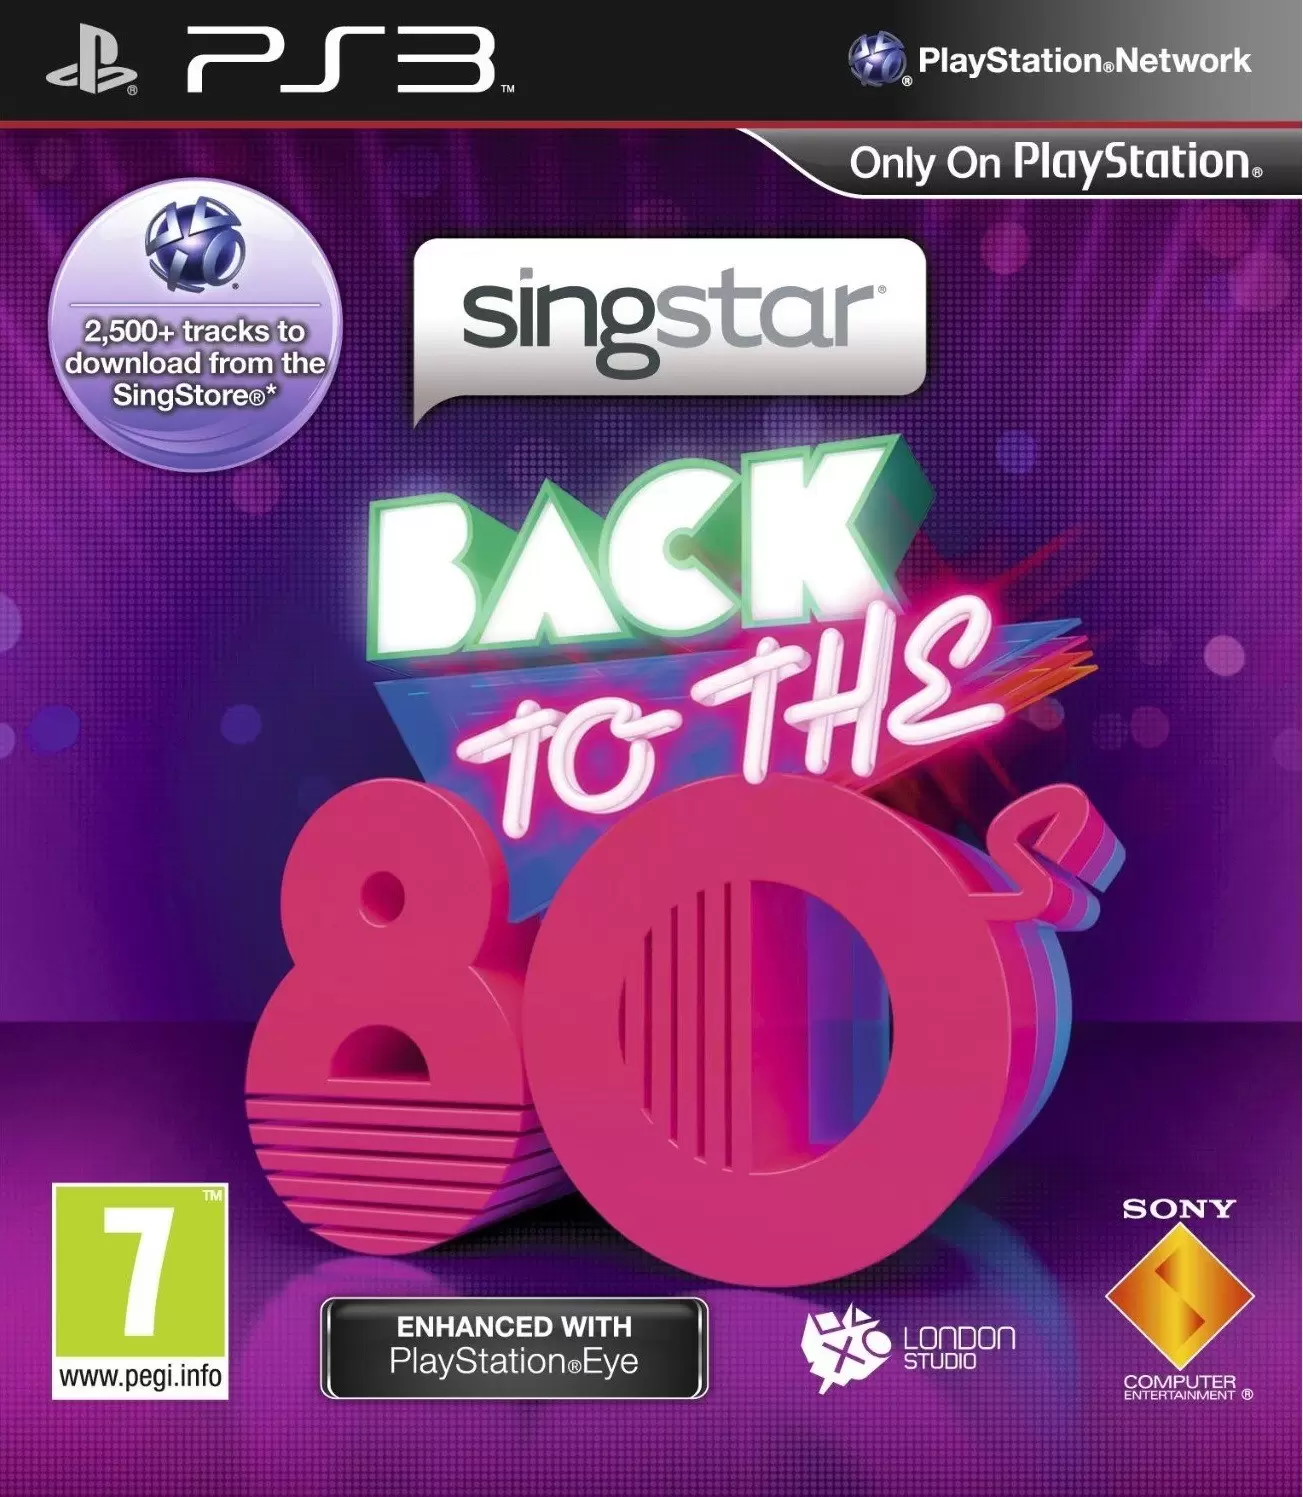 PS3 Games - SingStar: Back to the 80s